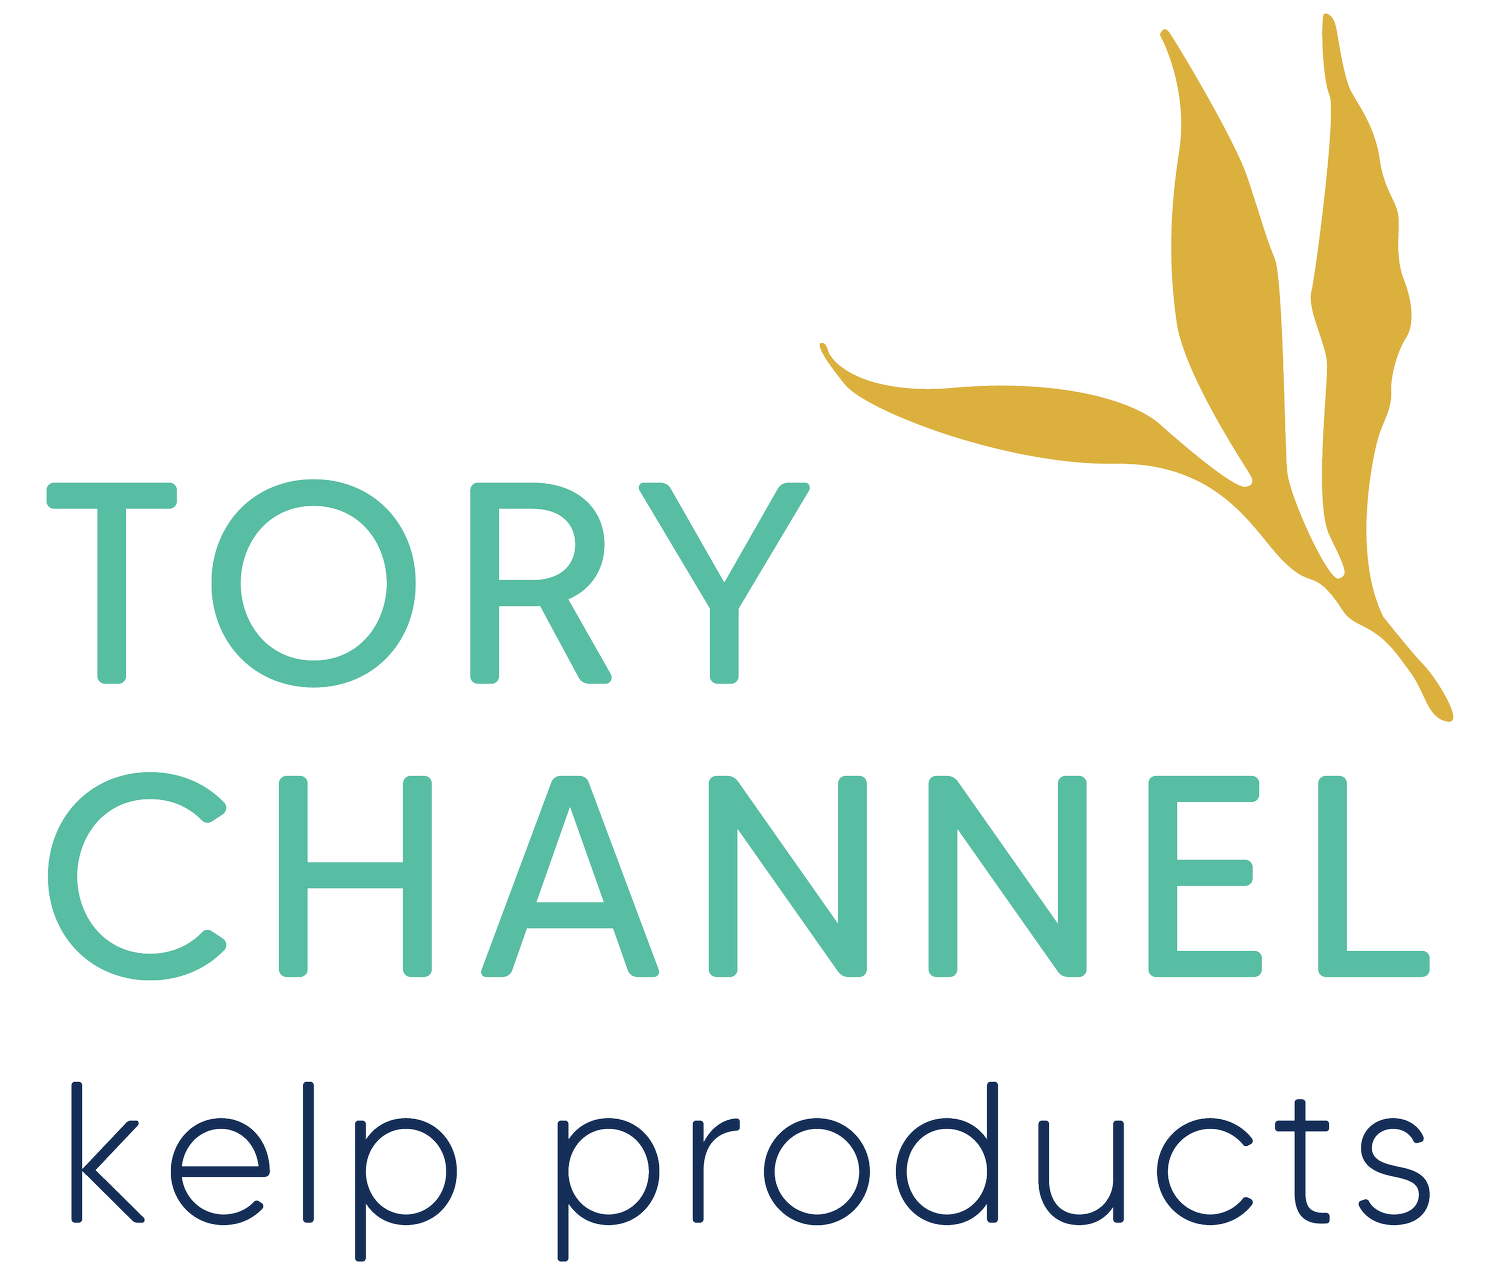 Tory Channel Kelp Products